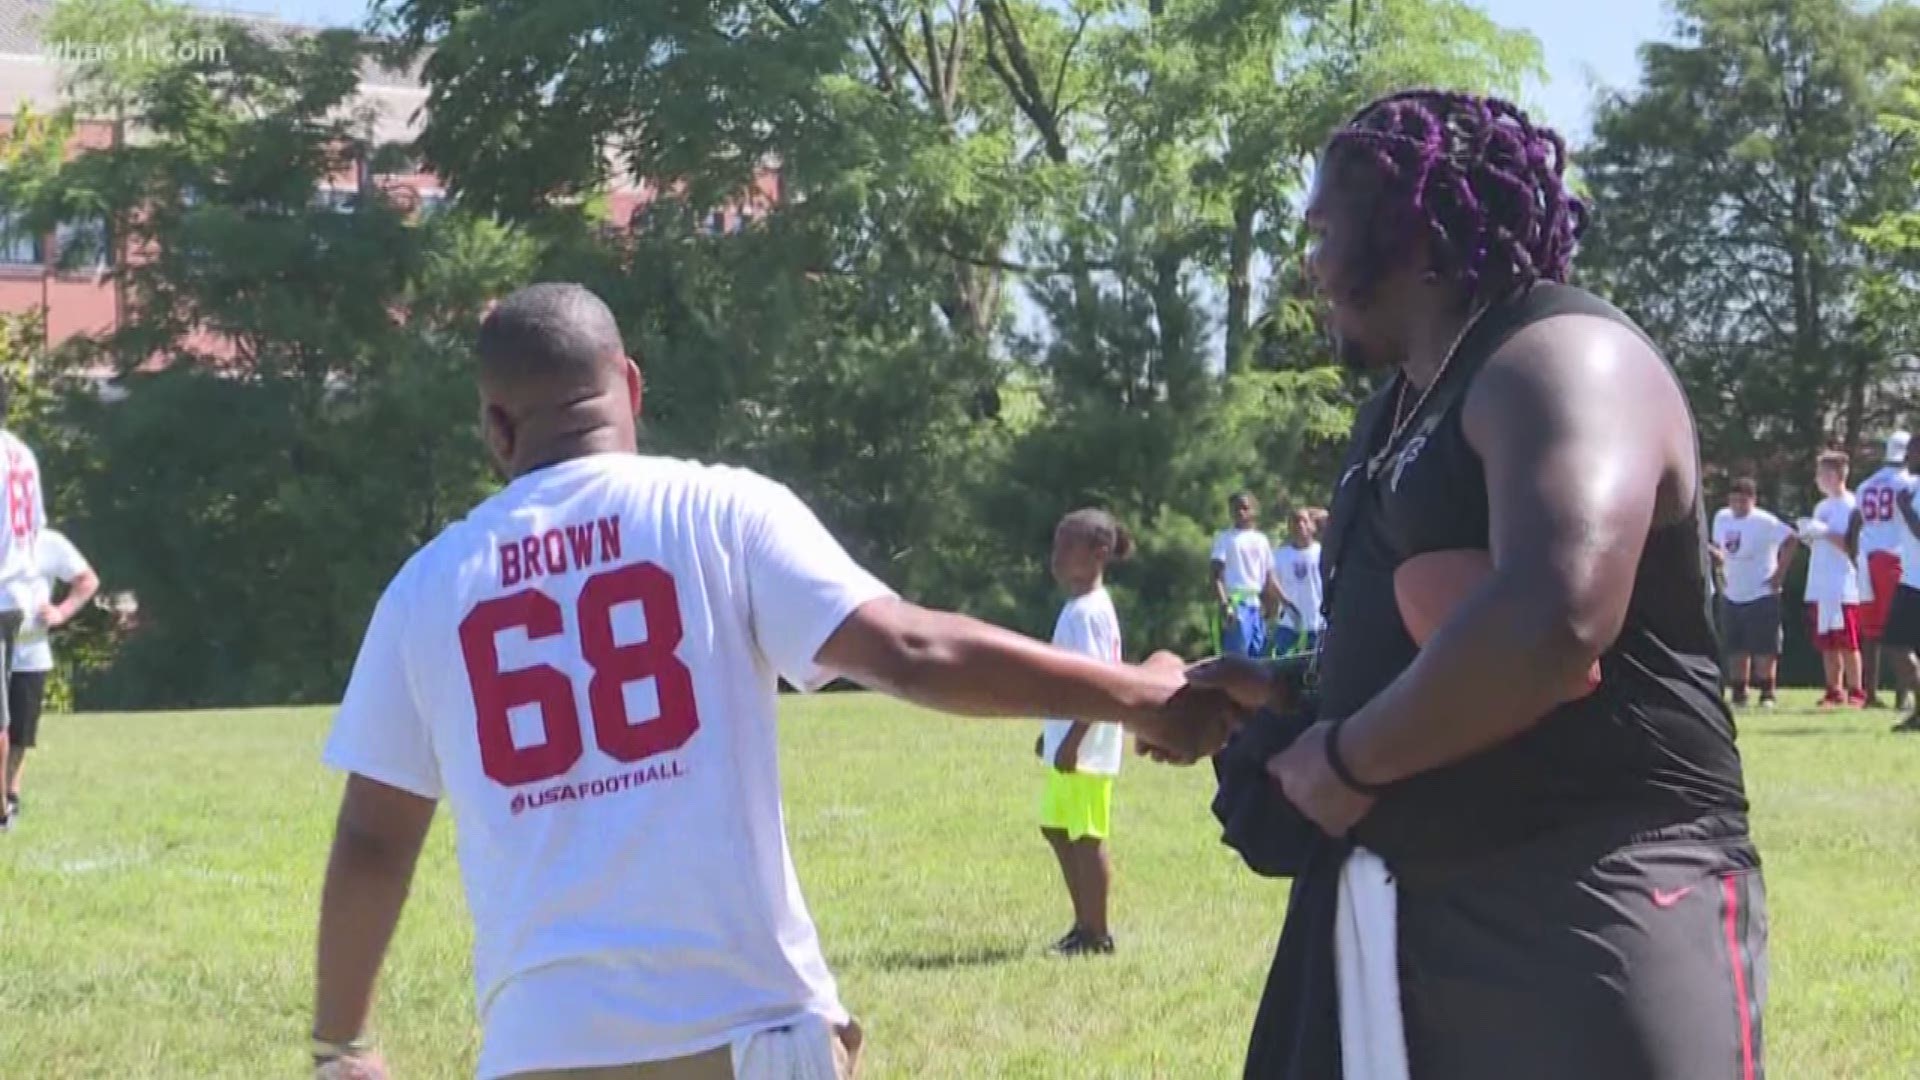 Atlanta Falcons offensive lineman Jamon Brown is a familiar sight around Louisville. The former UofL star has made it his mission to give back to his hometown during his NFL career.